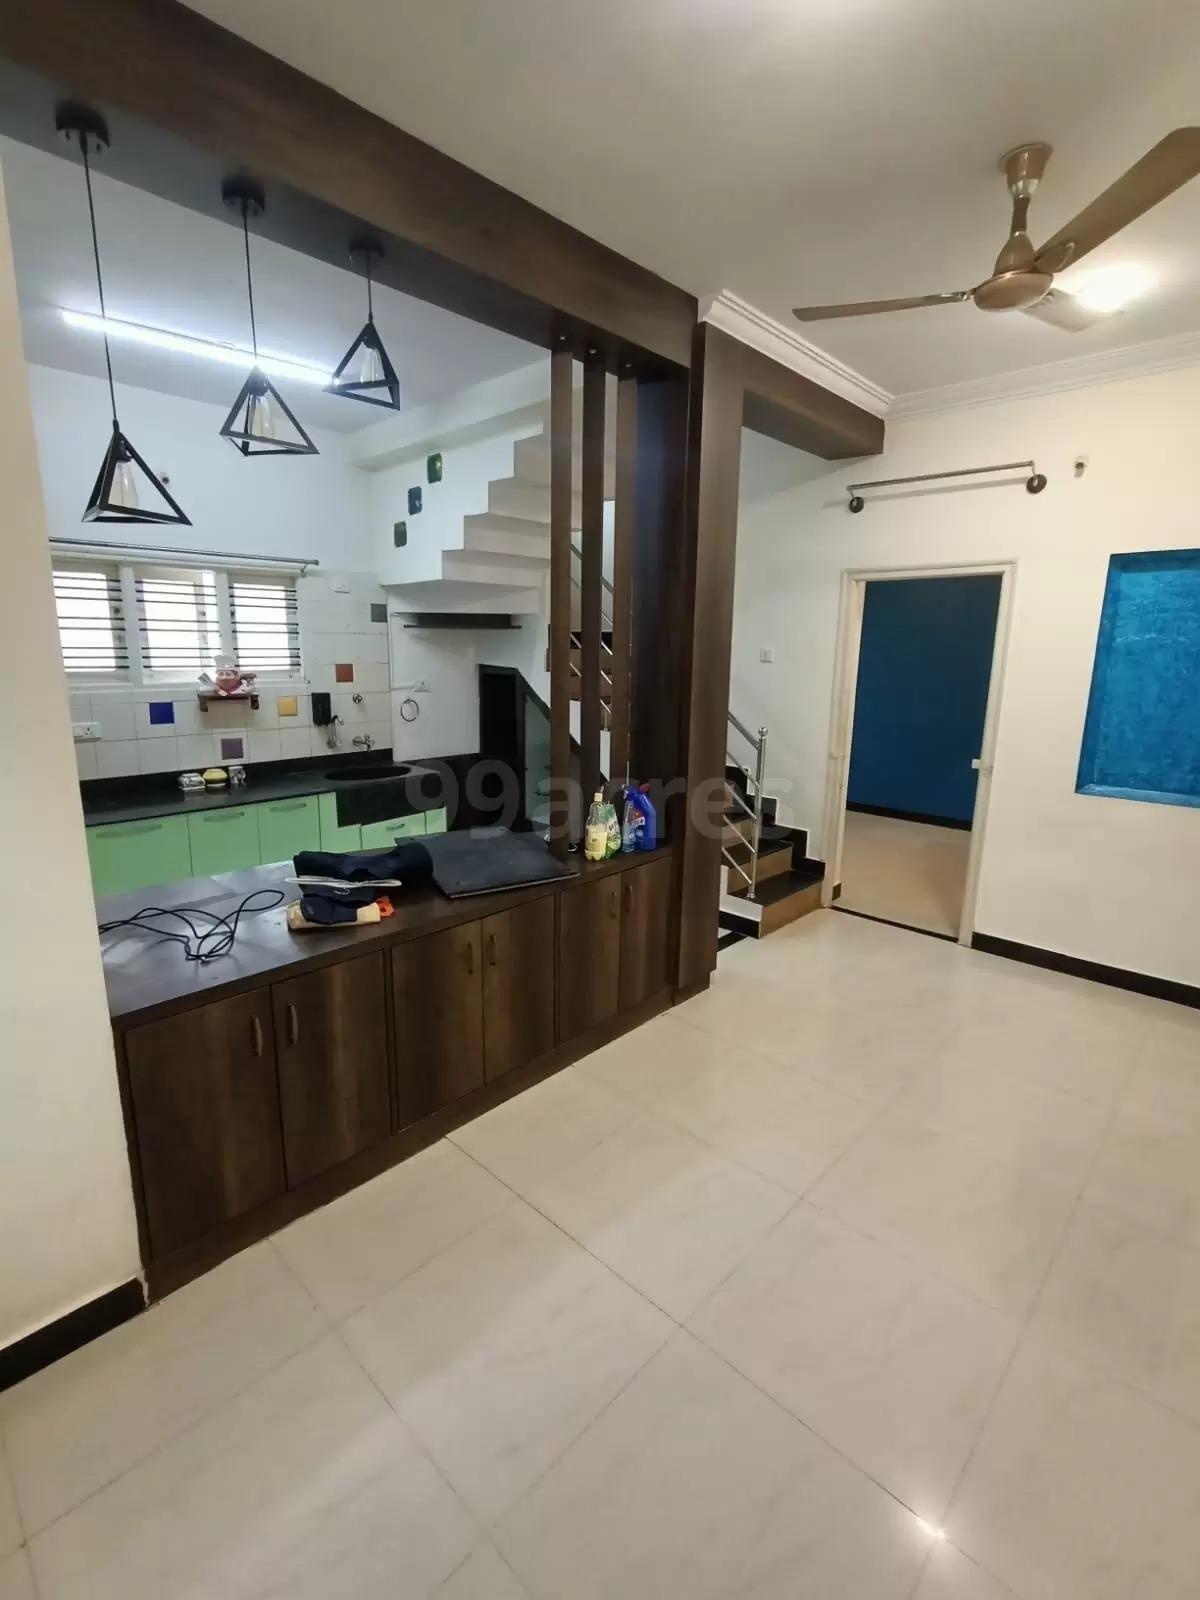 3 BHK Residential Apartment for Lease Only in Ulsoor